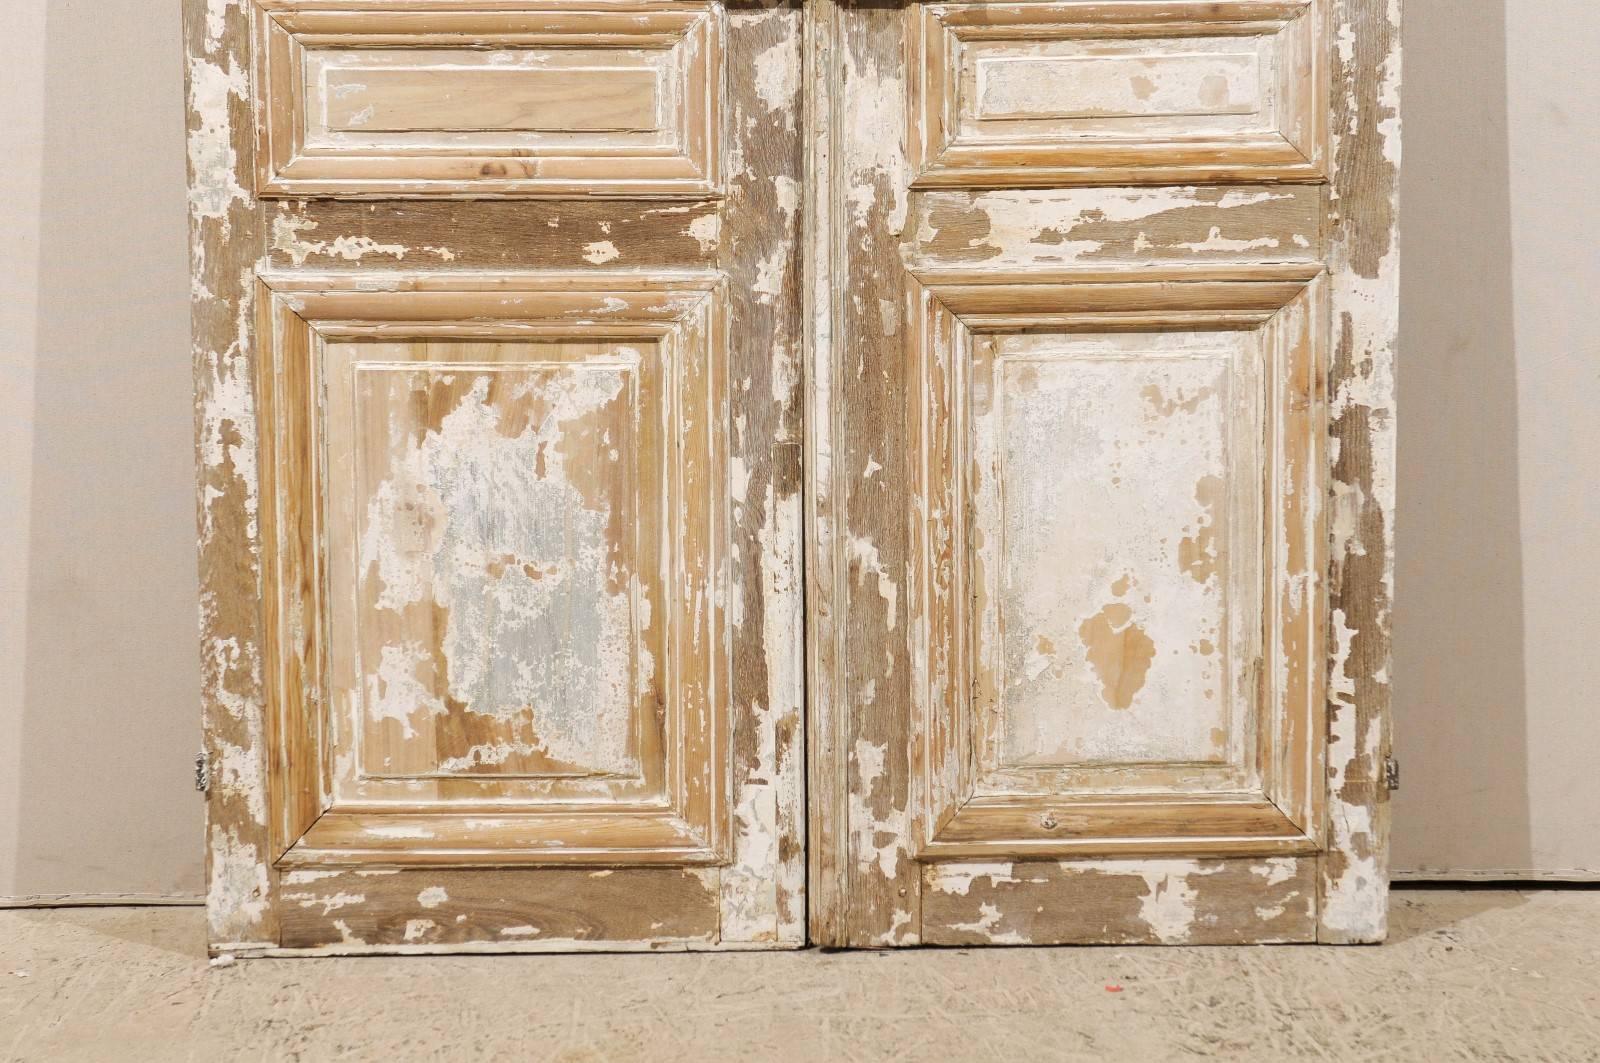 Pair of Aged Tall French Doors with Nice Old Hardware from the Mid-19th Century 5